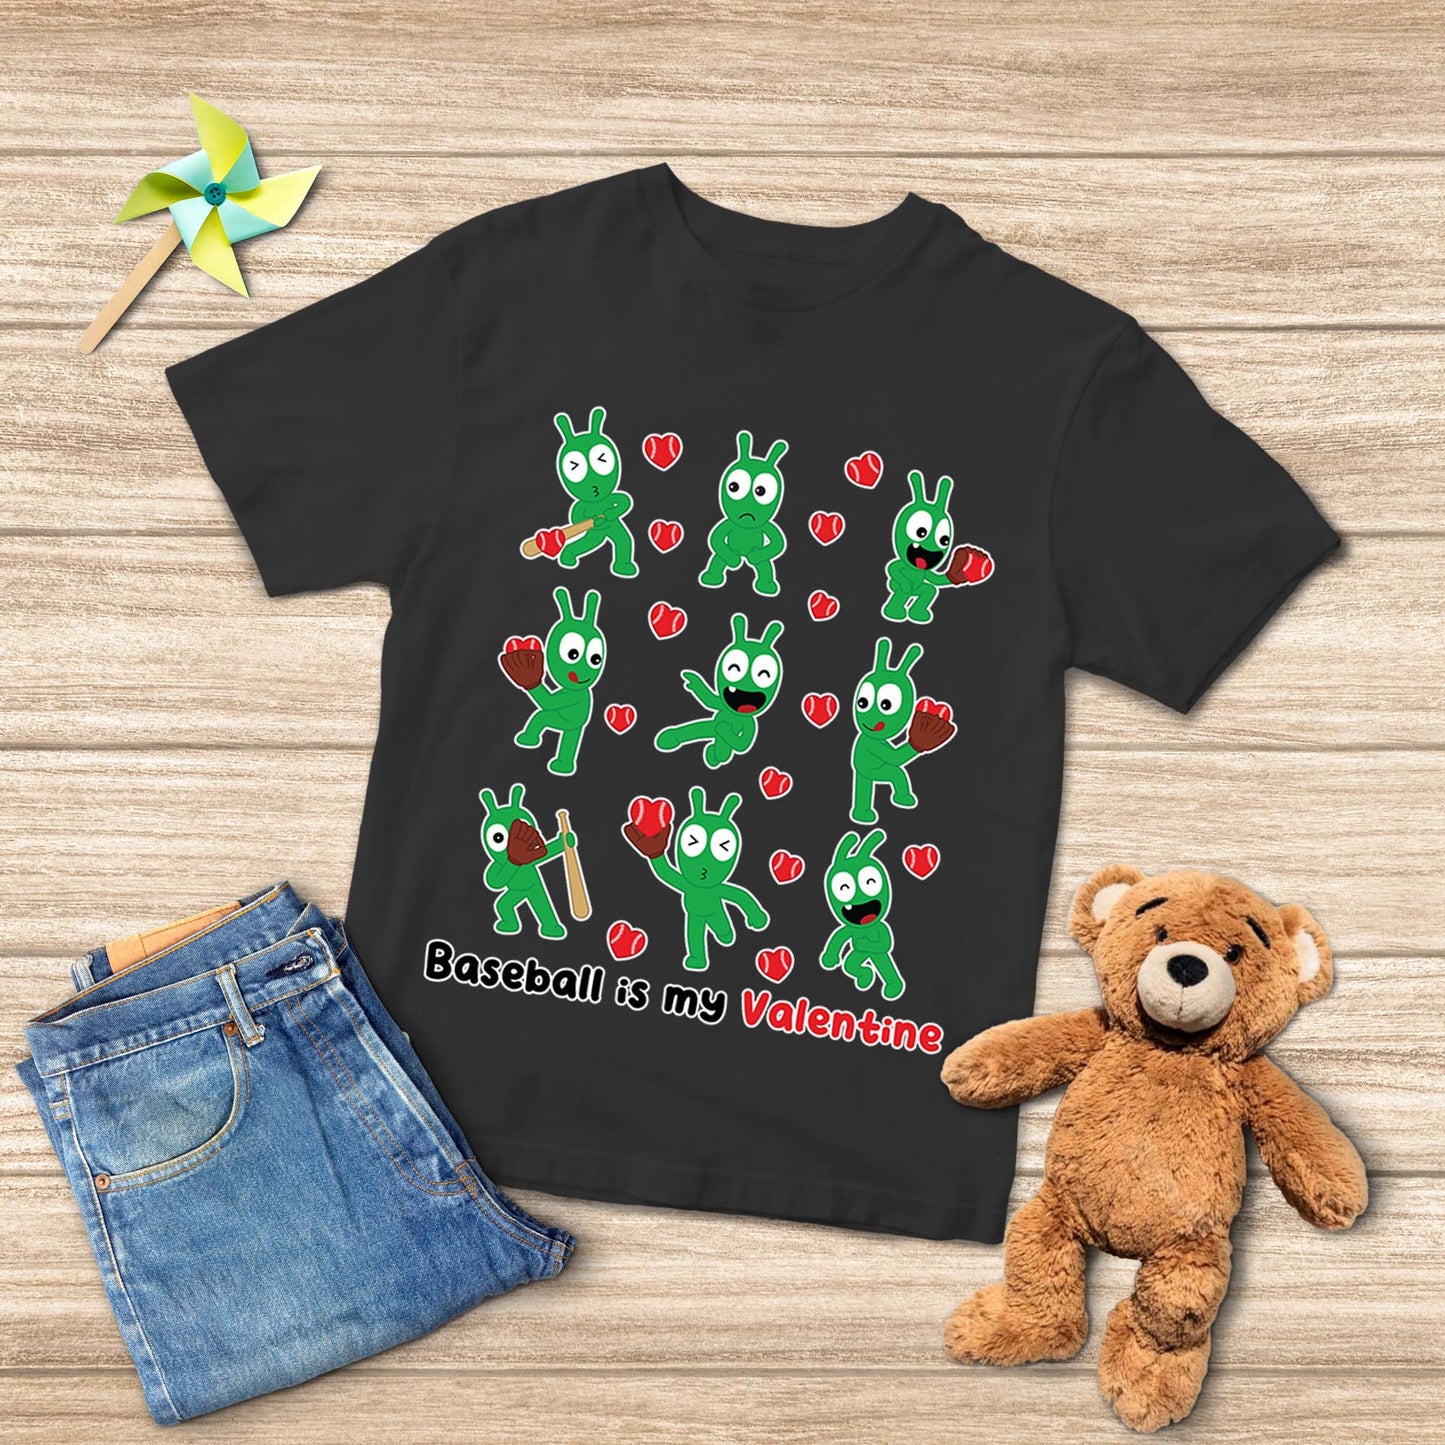 Baseball Is My Valentine Pea Pea Youth T-Shirt, Pea Pea Baseball Shirts Gift For Sport Lovers